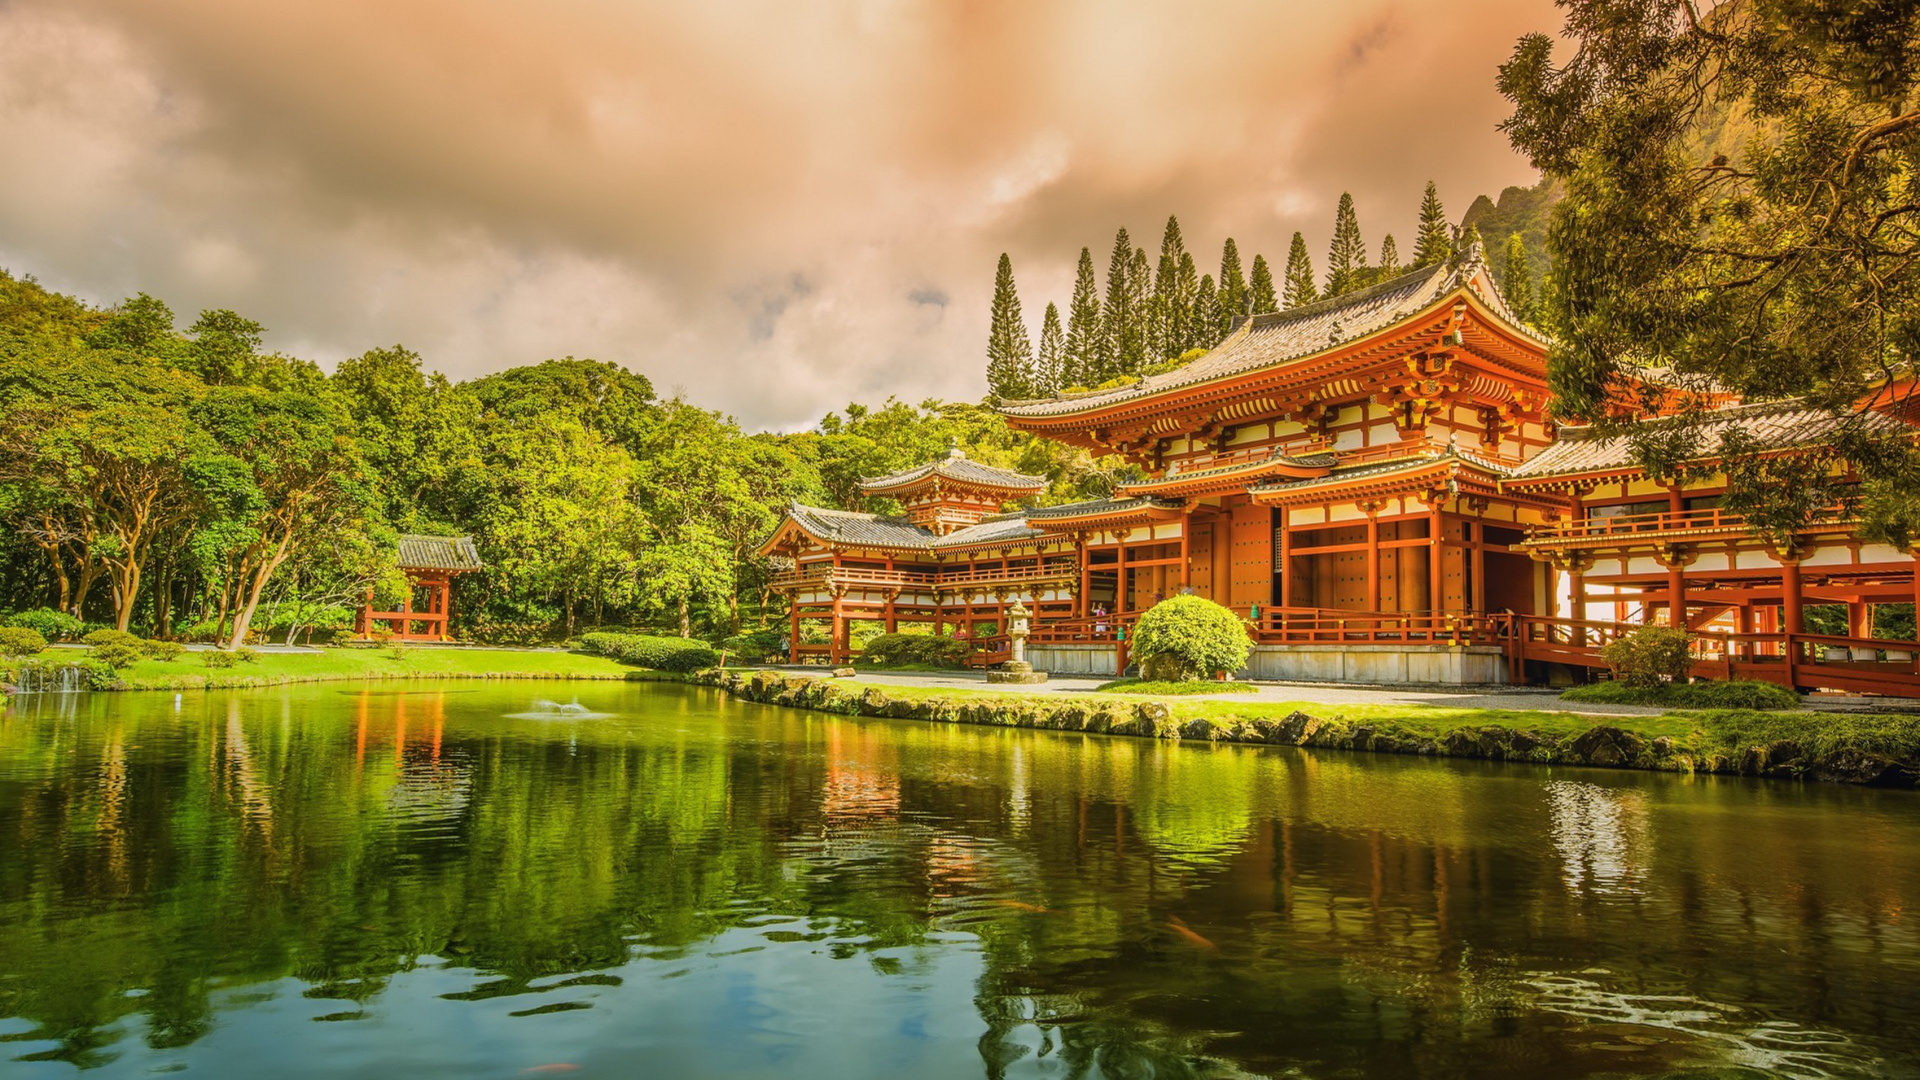 Brown and White Temple Near Green Trees and Lake Under Cloudy Sky During Daytime. Wallpaper in 1920x1080 Resolution